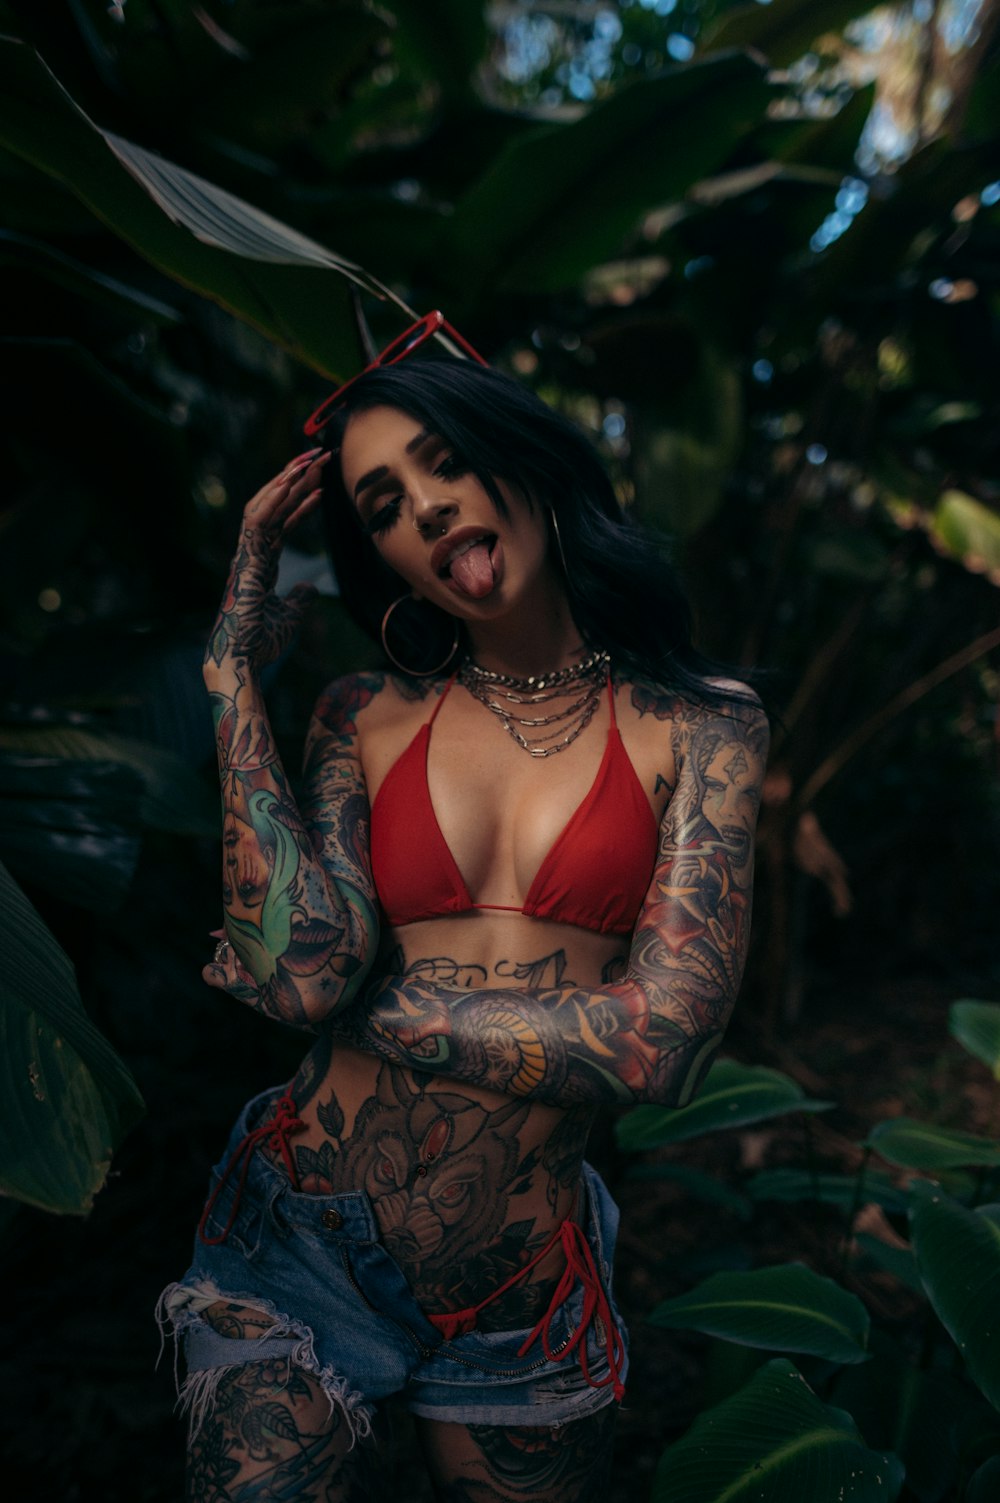 a woman in a red bikini with tattoos on her body